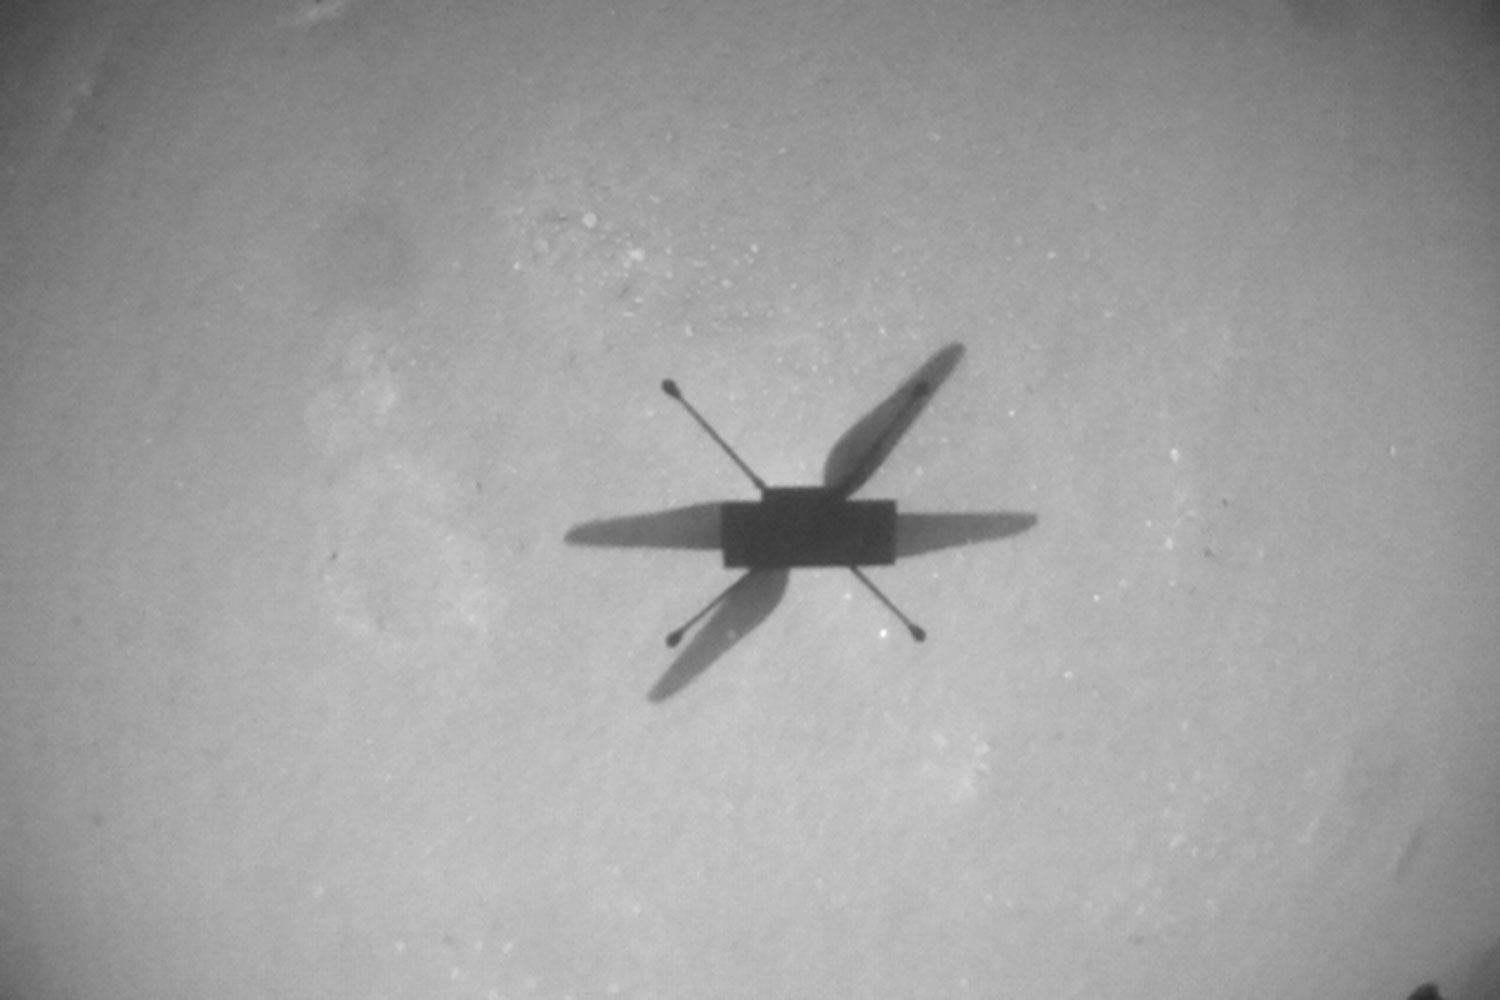 NASA's Ingenuity helicopter has flown its first mile on Mars